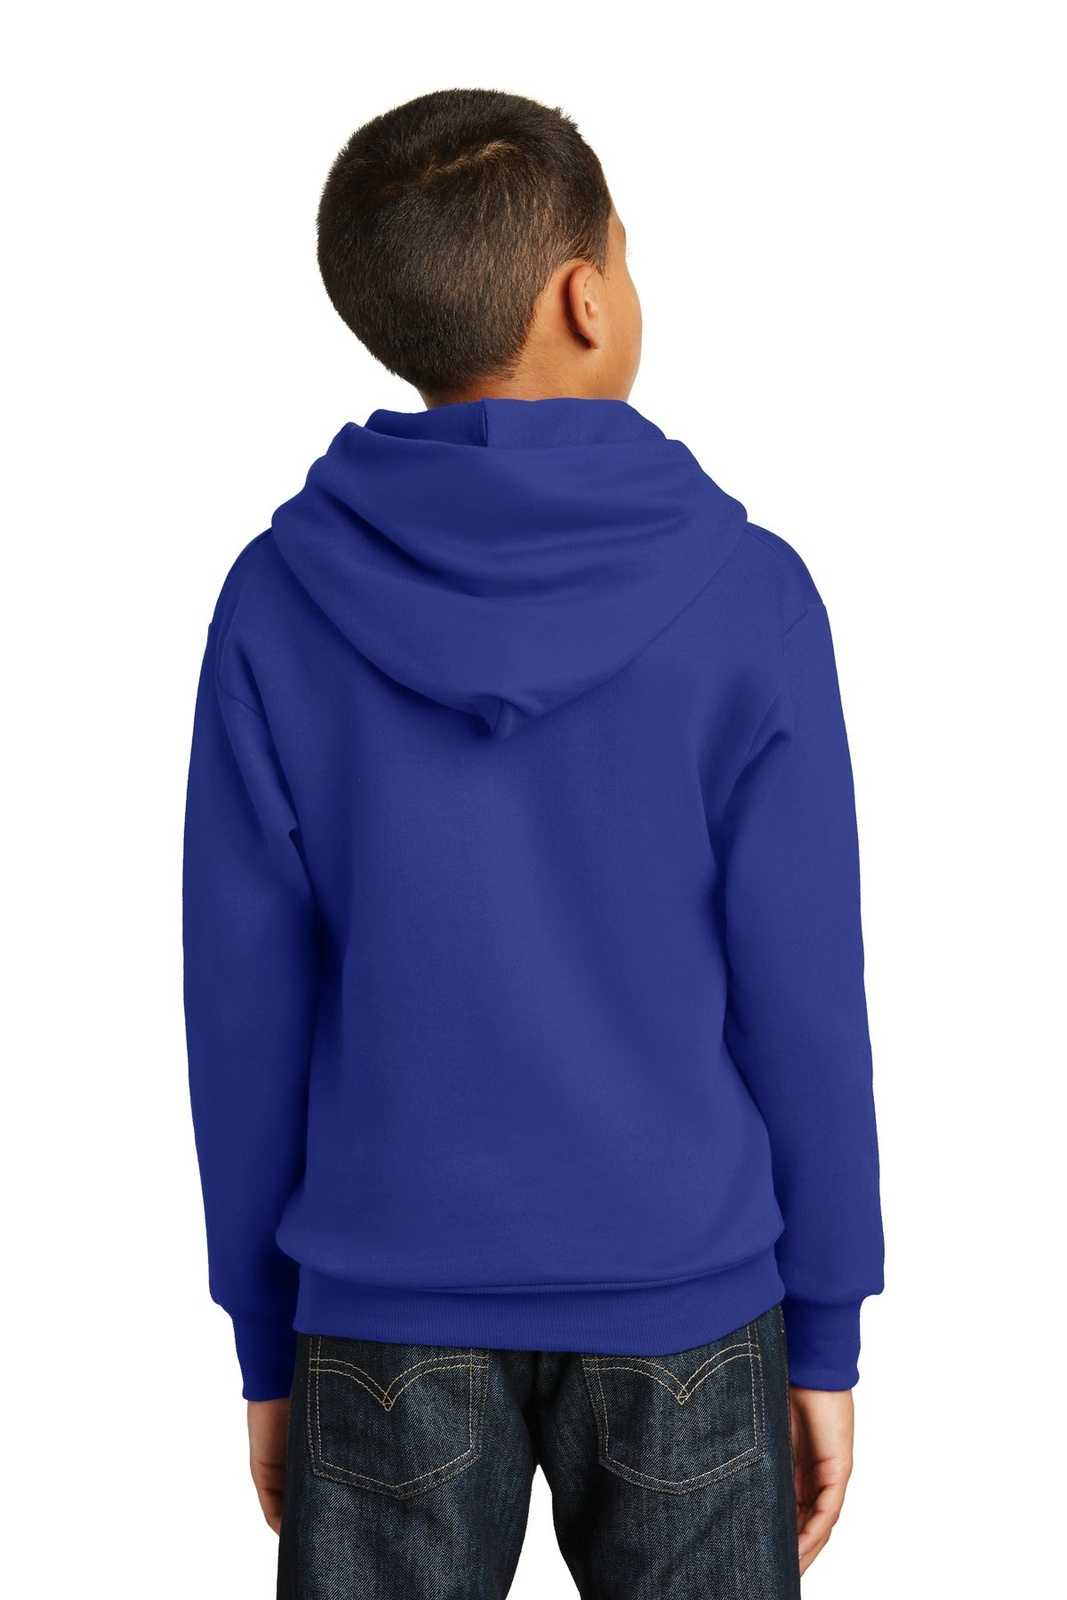 Hanes P470 Youth Ecosmart Pullover Hooded Sweatshirt - Deep Royal - HIT a Double - 1